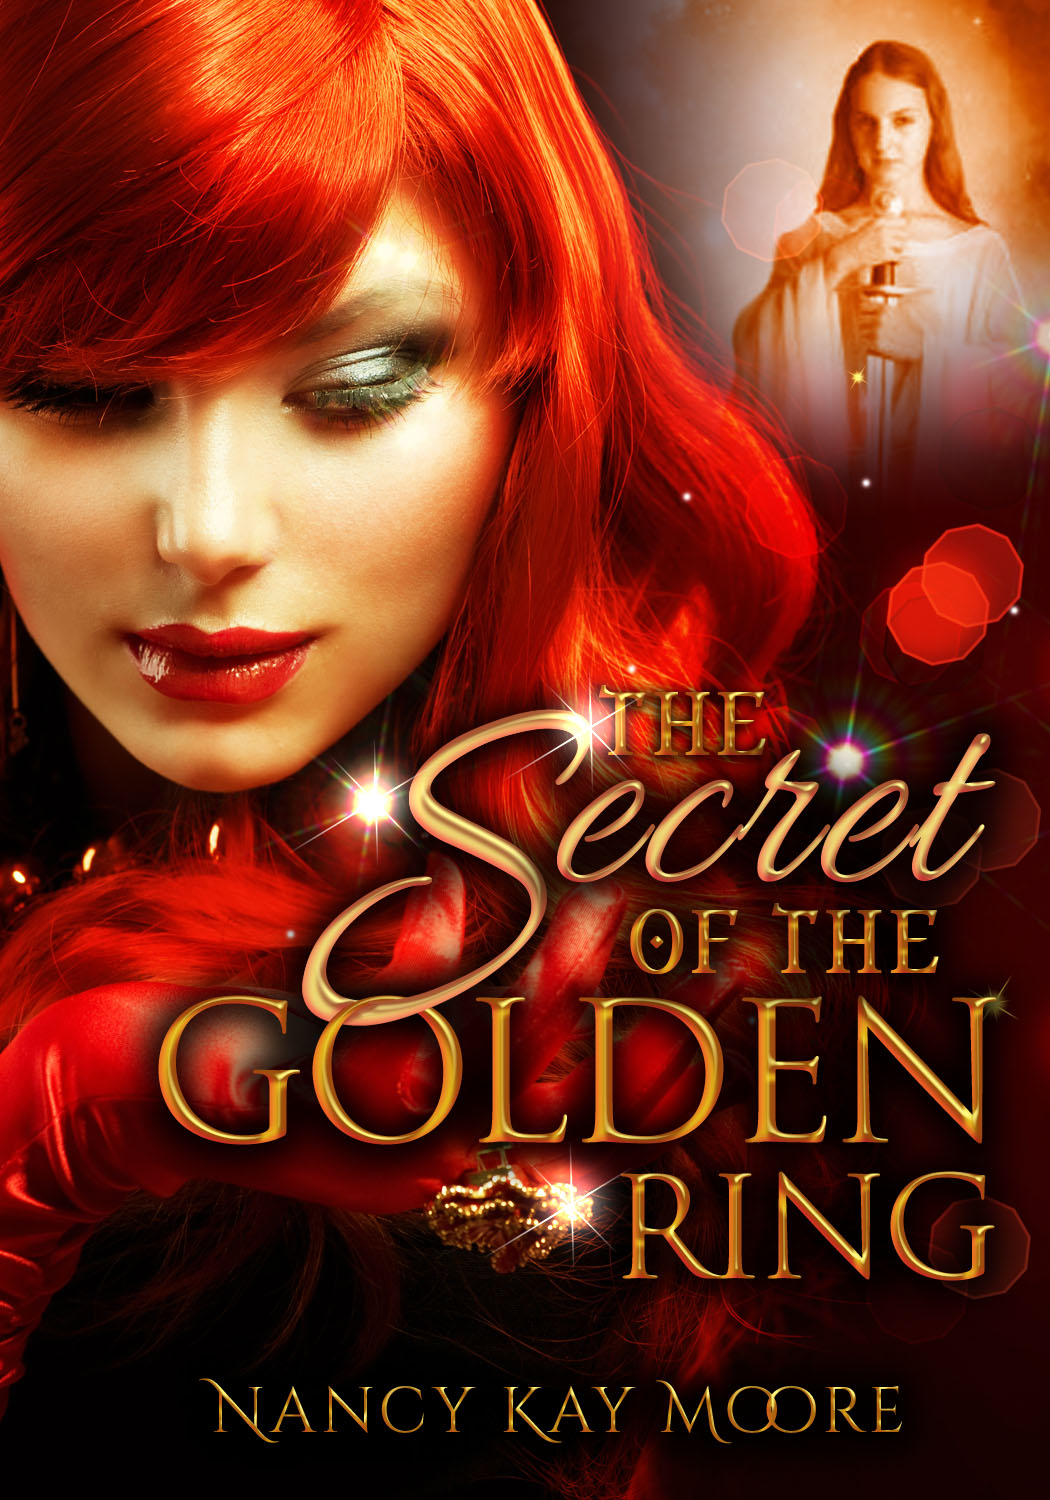 FREE: The Secret of the Golden Ring by Nancy Kay Moore